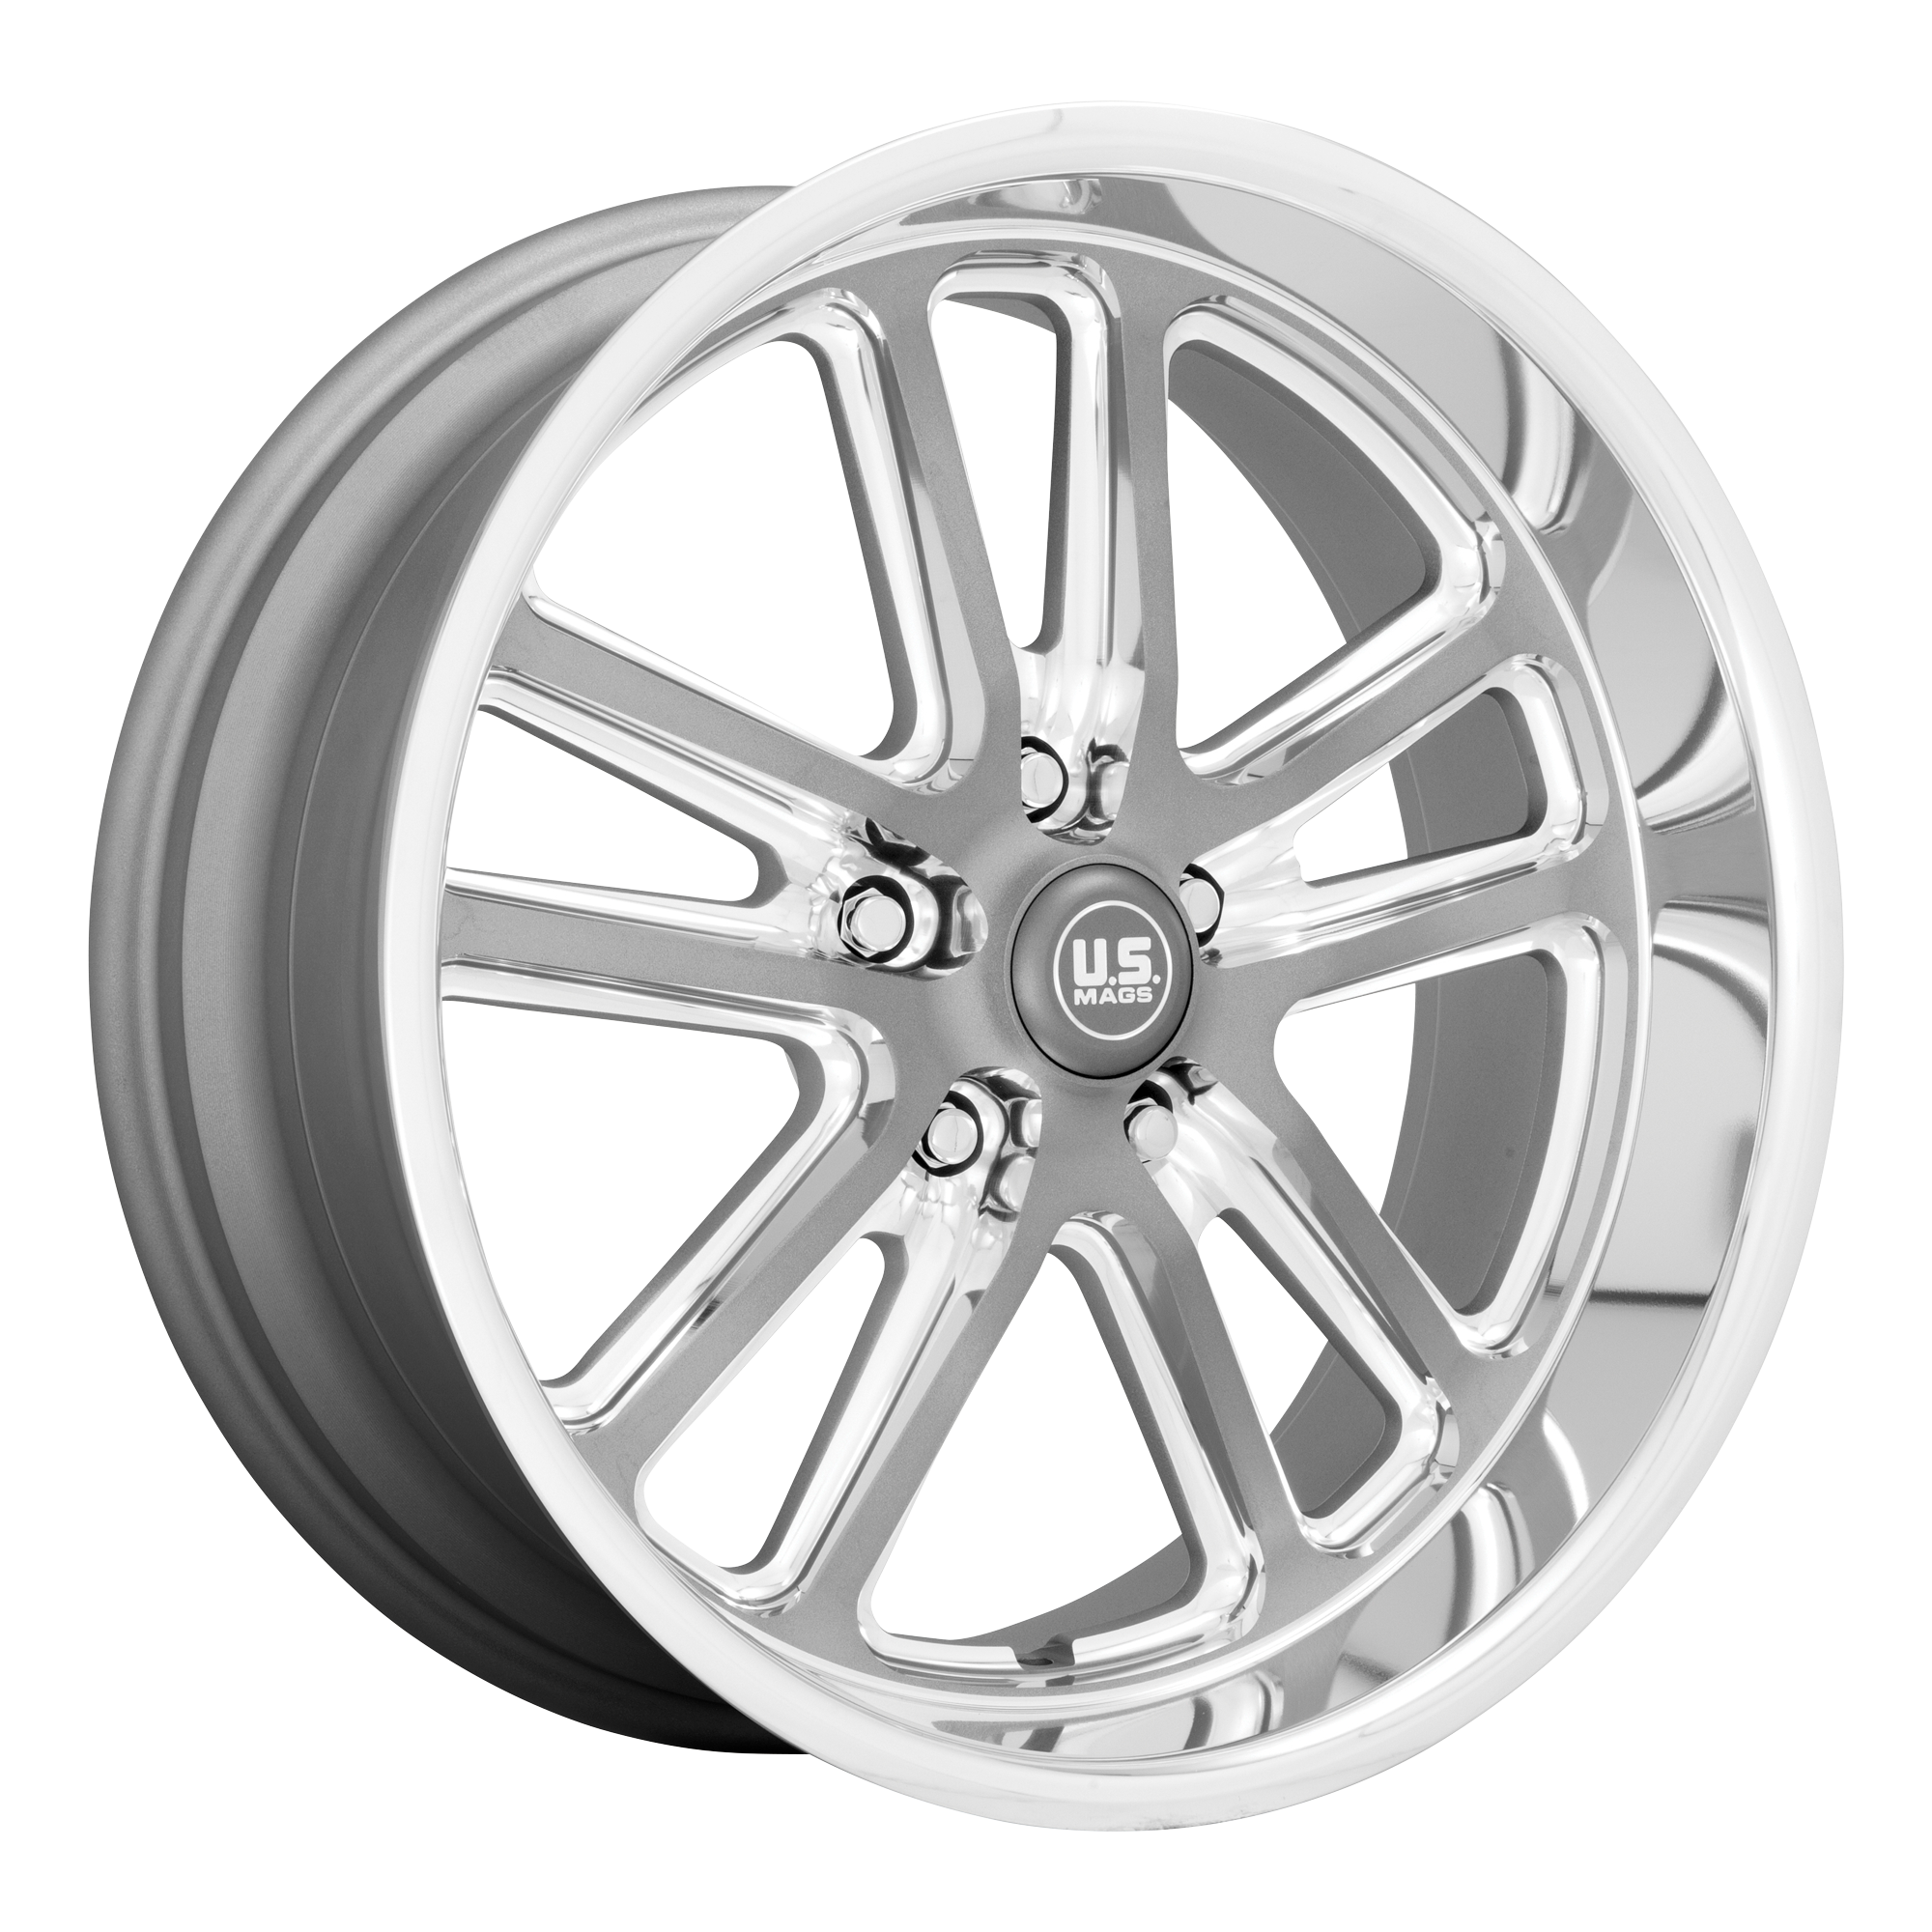 BULLET 20x9.5 5x127.00 TEXTURED GUN METAL W/ MILLED EDGES (1 mm) - Tires and Engine Performance